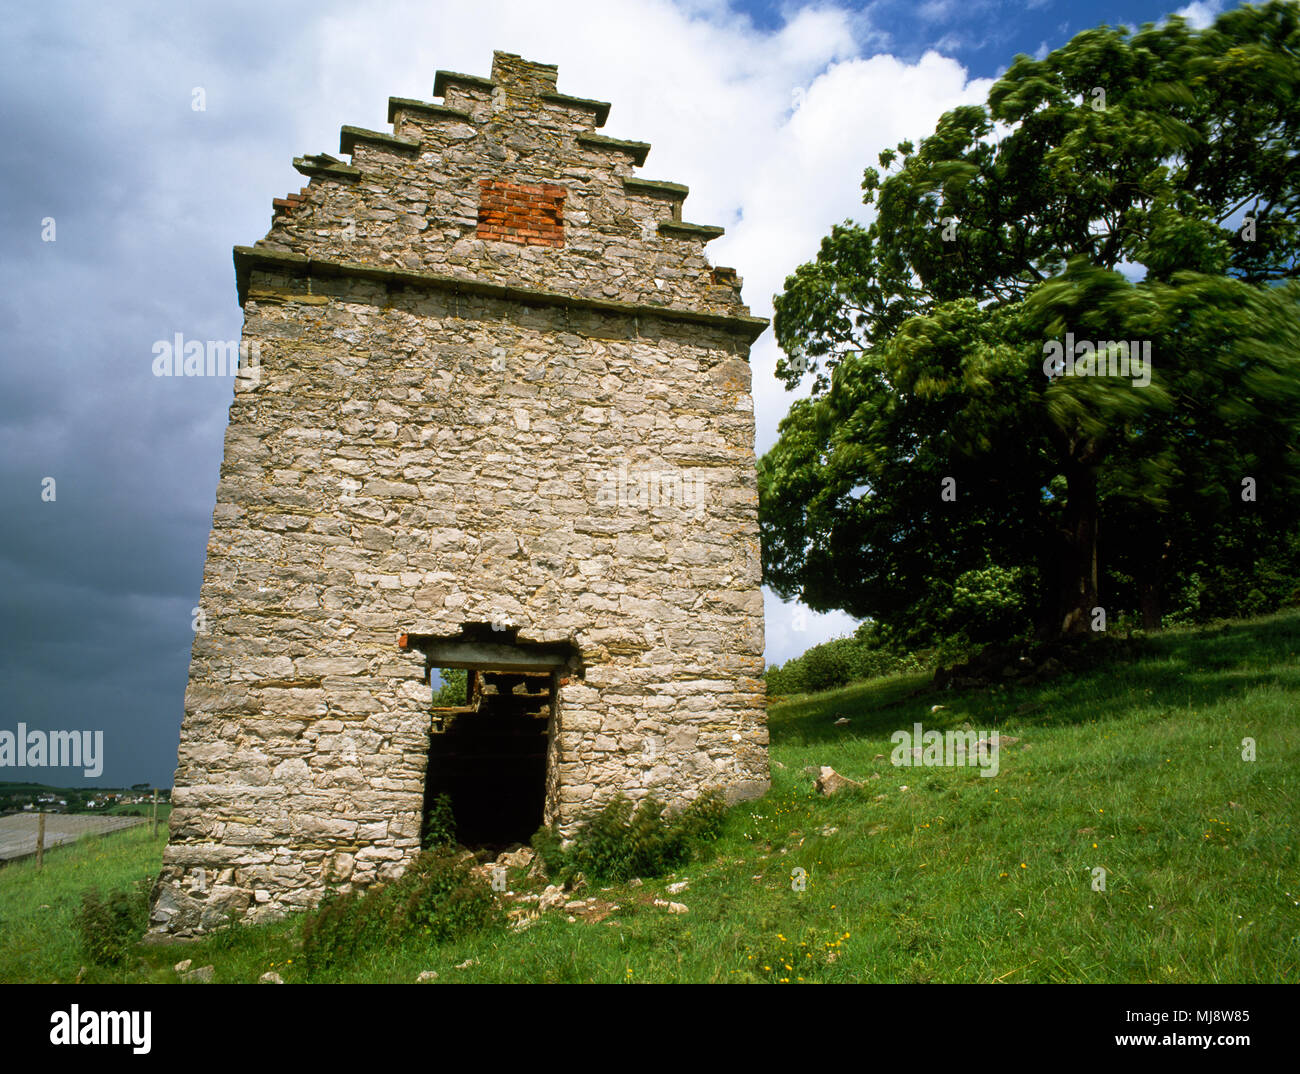 Gop Farm Dovecote, Trelawnyd, Flintshire, North Wales, UK. Ruined  17th century tall square dovecote made from limestone. Listed Building Stock Photo